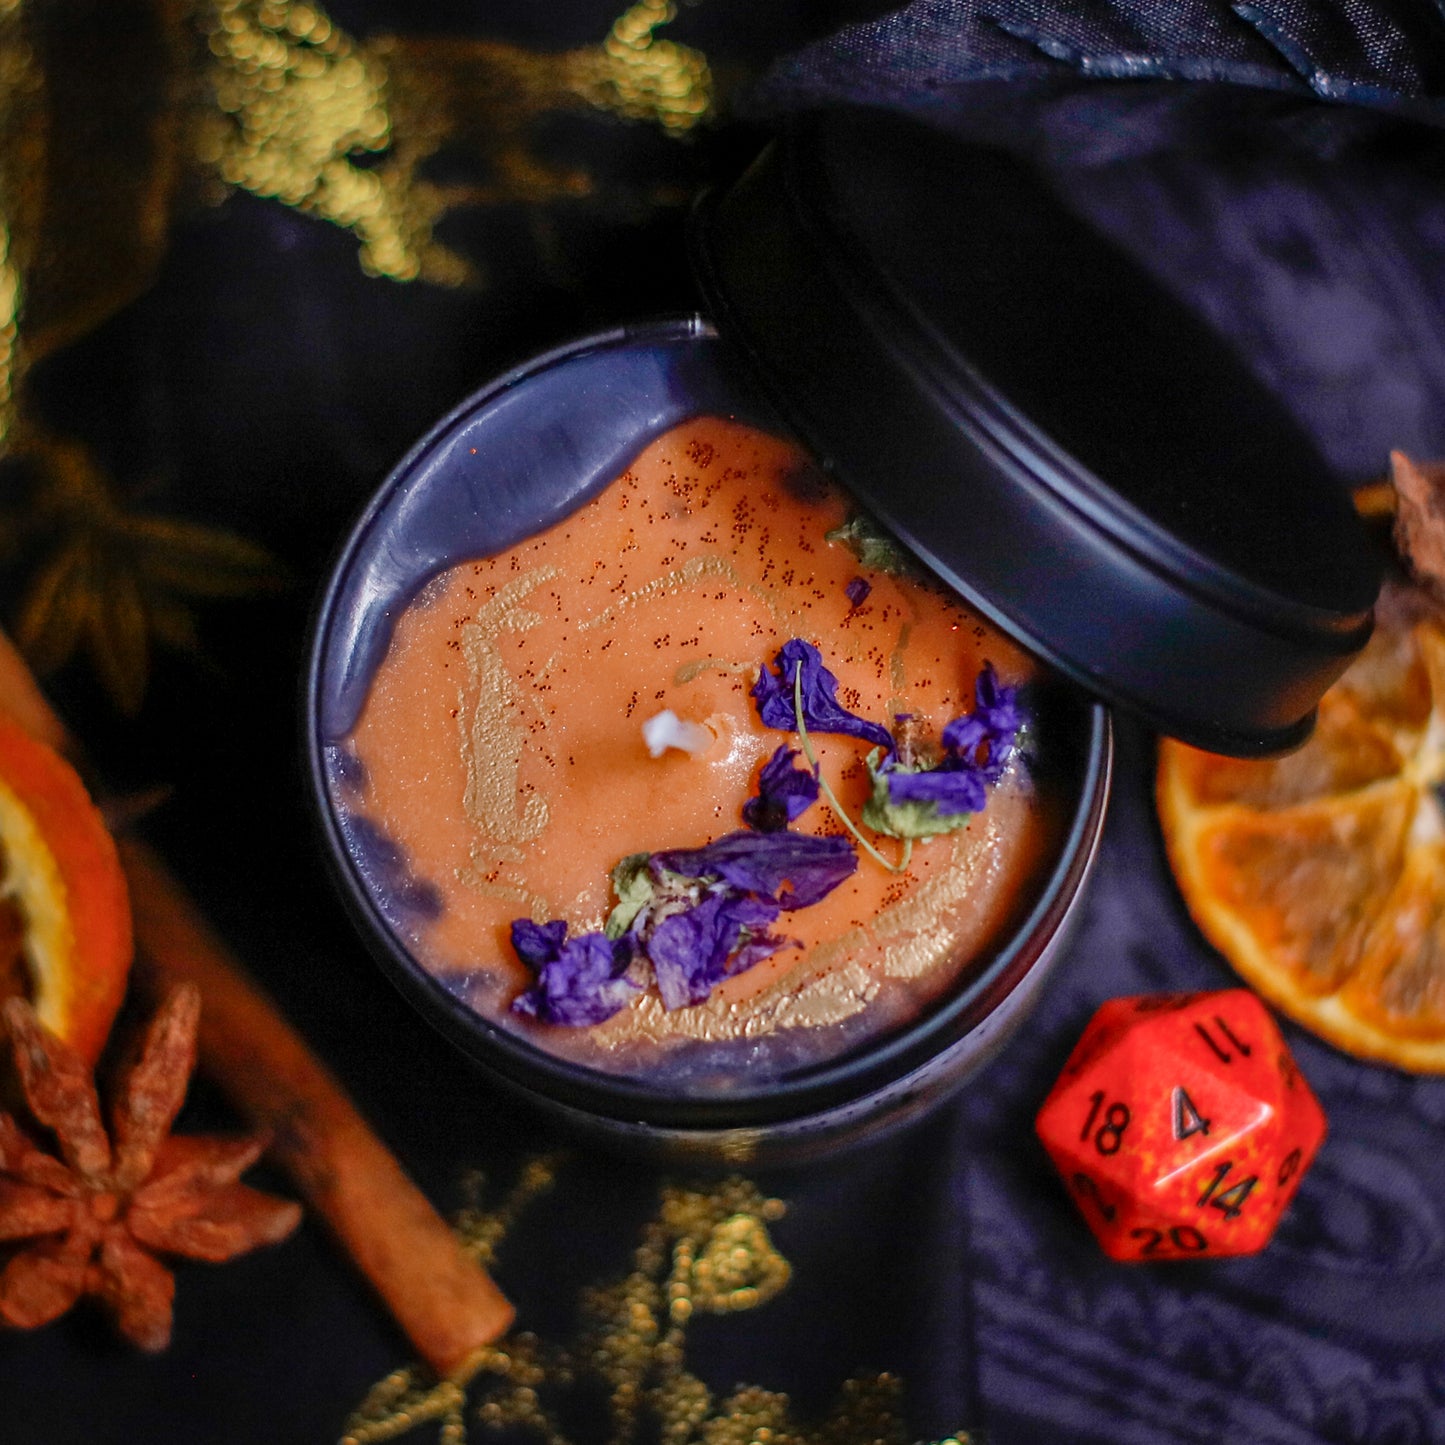 RAPHAEL inspired candle - 'Bittersweet Contract' Baldur's Gate 3 inspired soy candle 100 ML